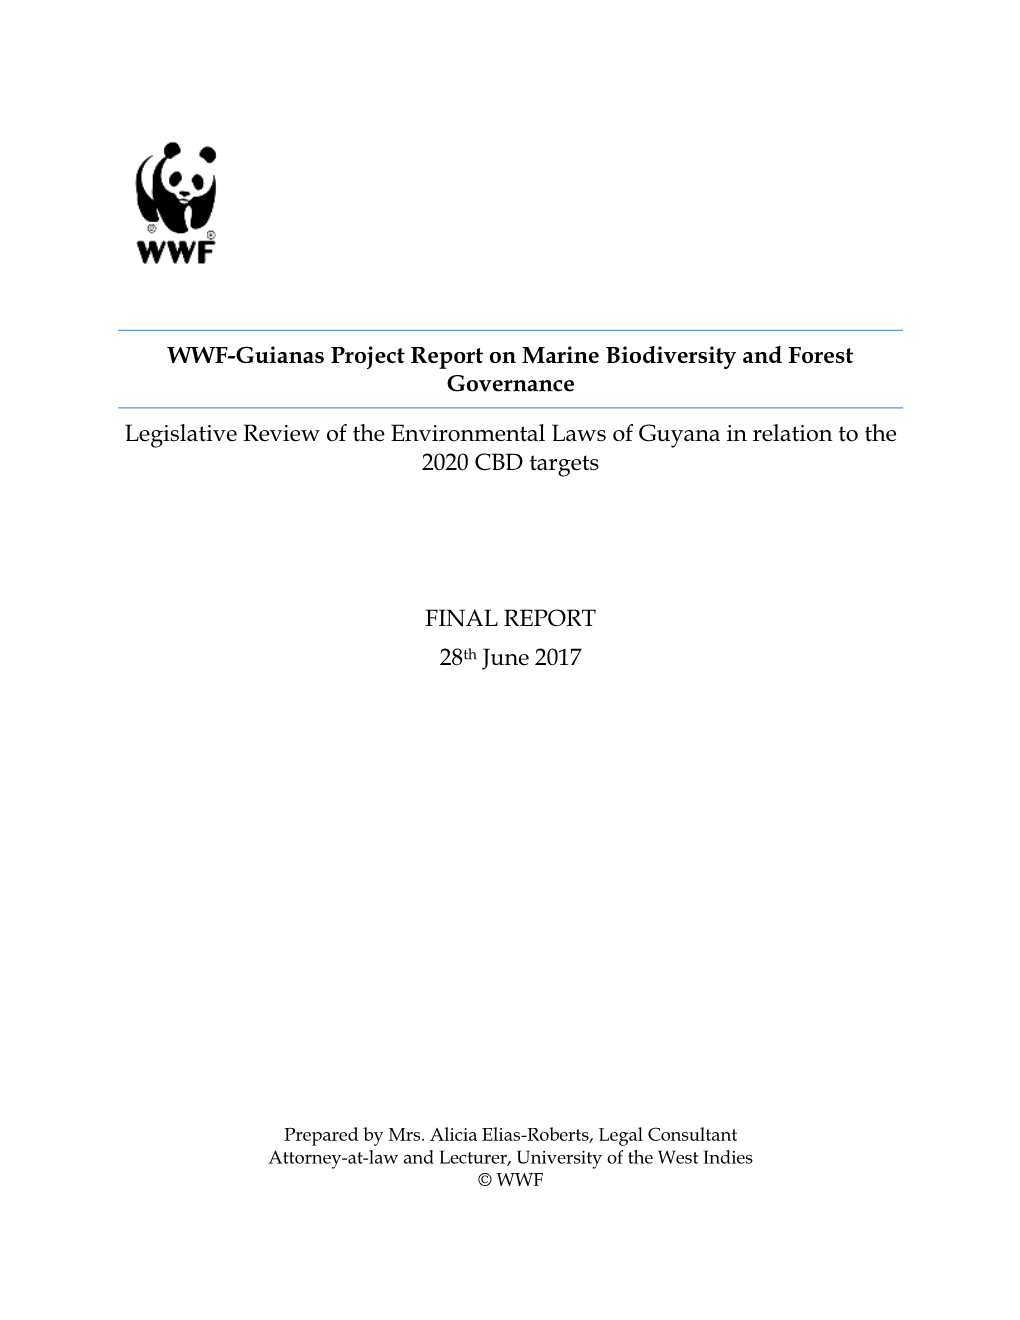 WWF-Guianas Project Report on Marine Biodiversity and Forest Governance